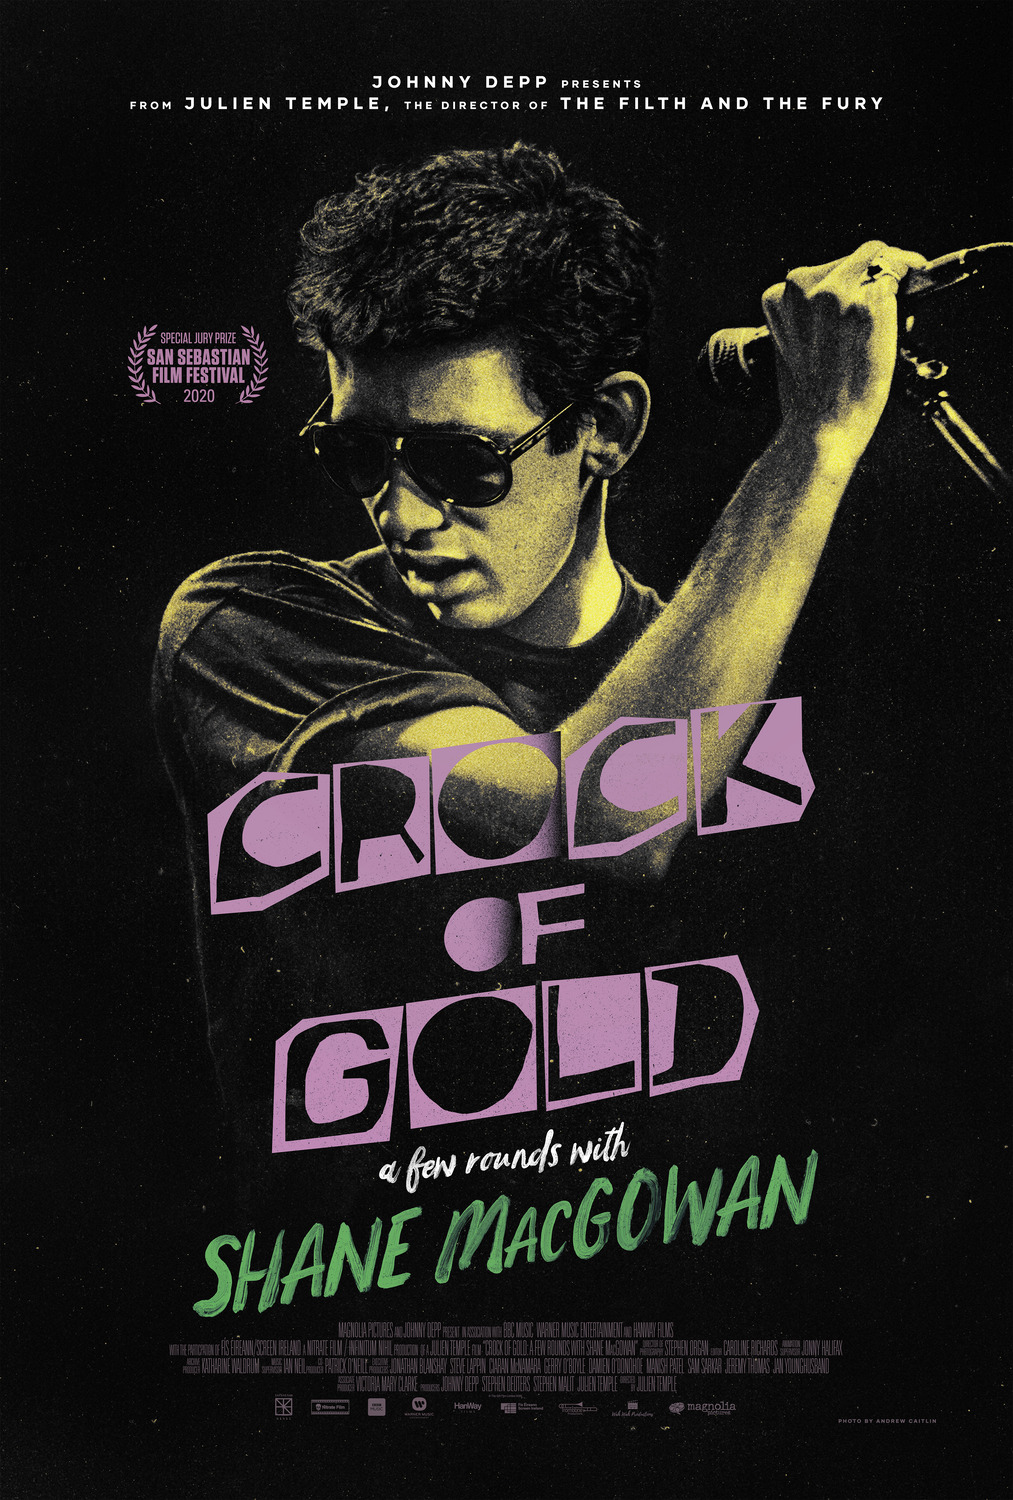 Extra Large Movie Poster Image for Crock of Gold (#2 of 2)